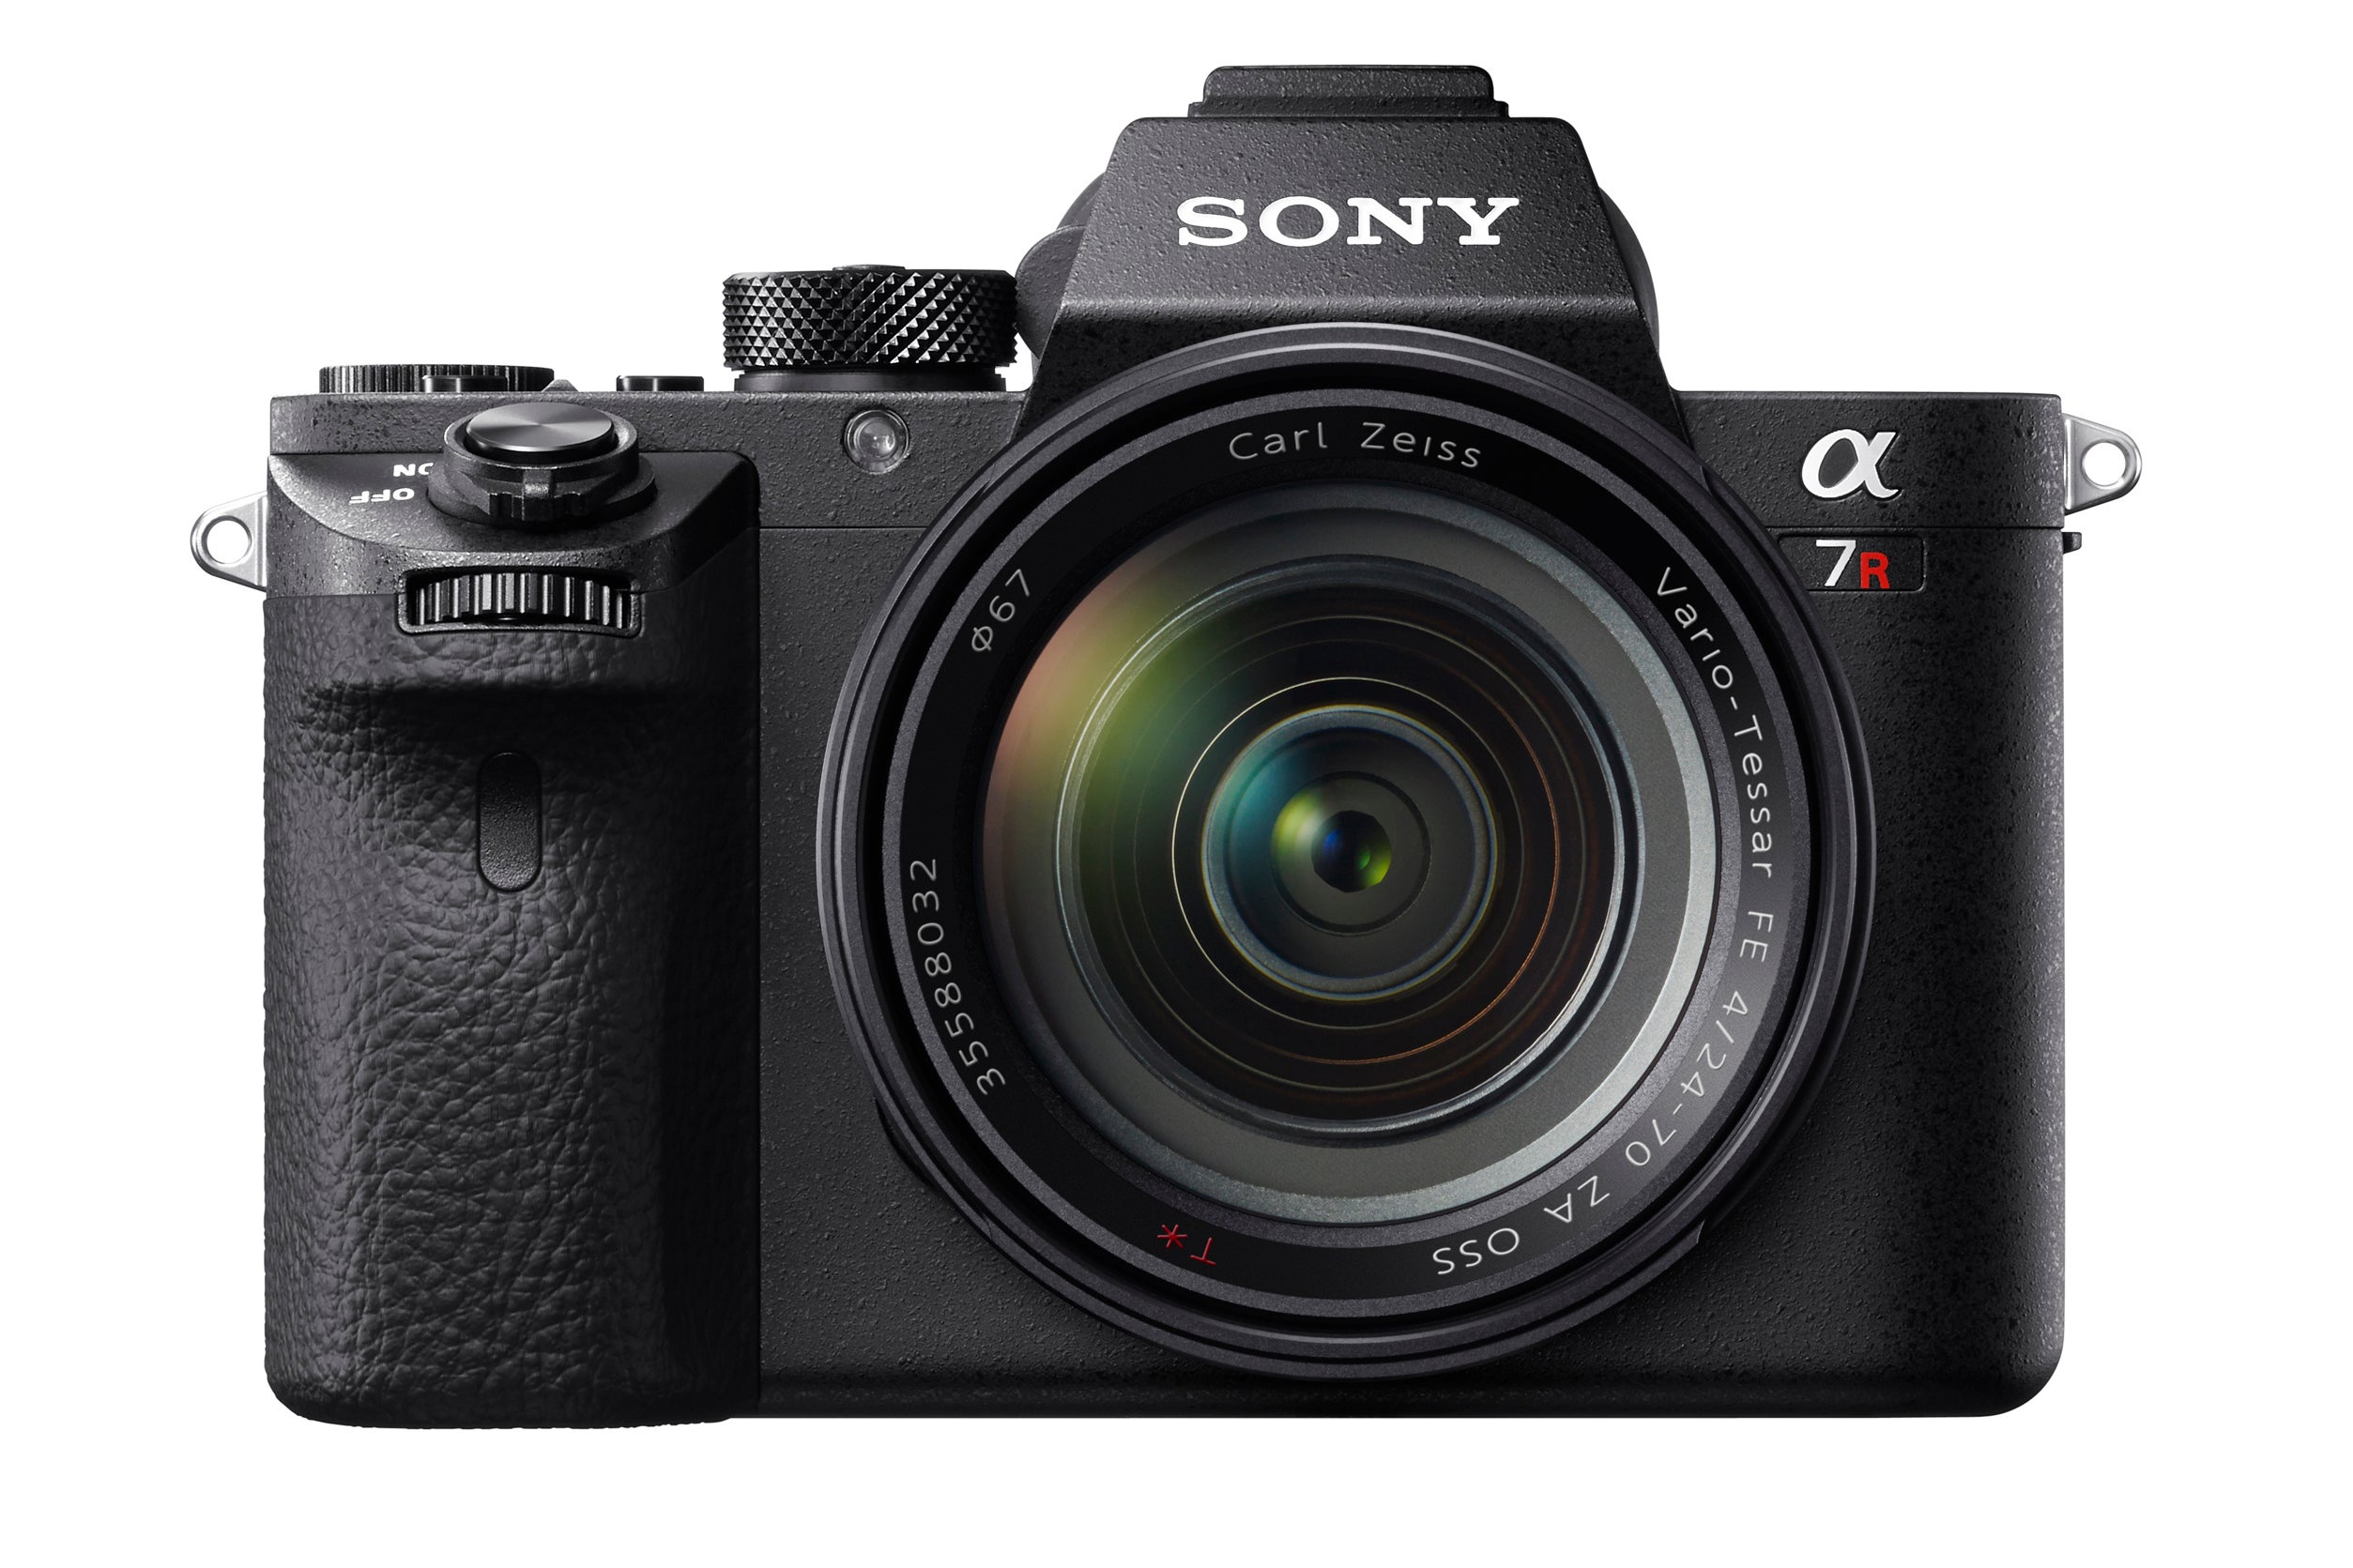 Sony A7 II II vs A7R - what are the key differences?